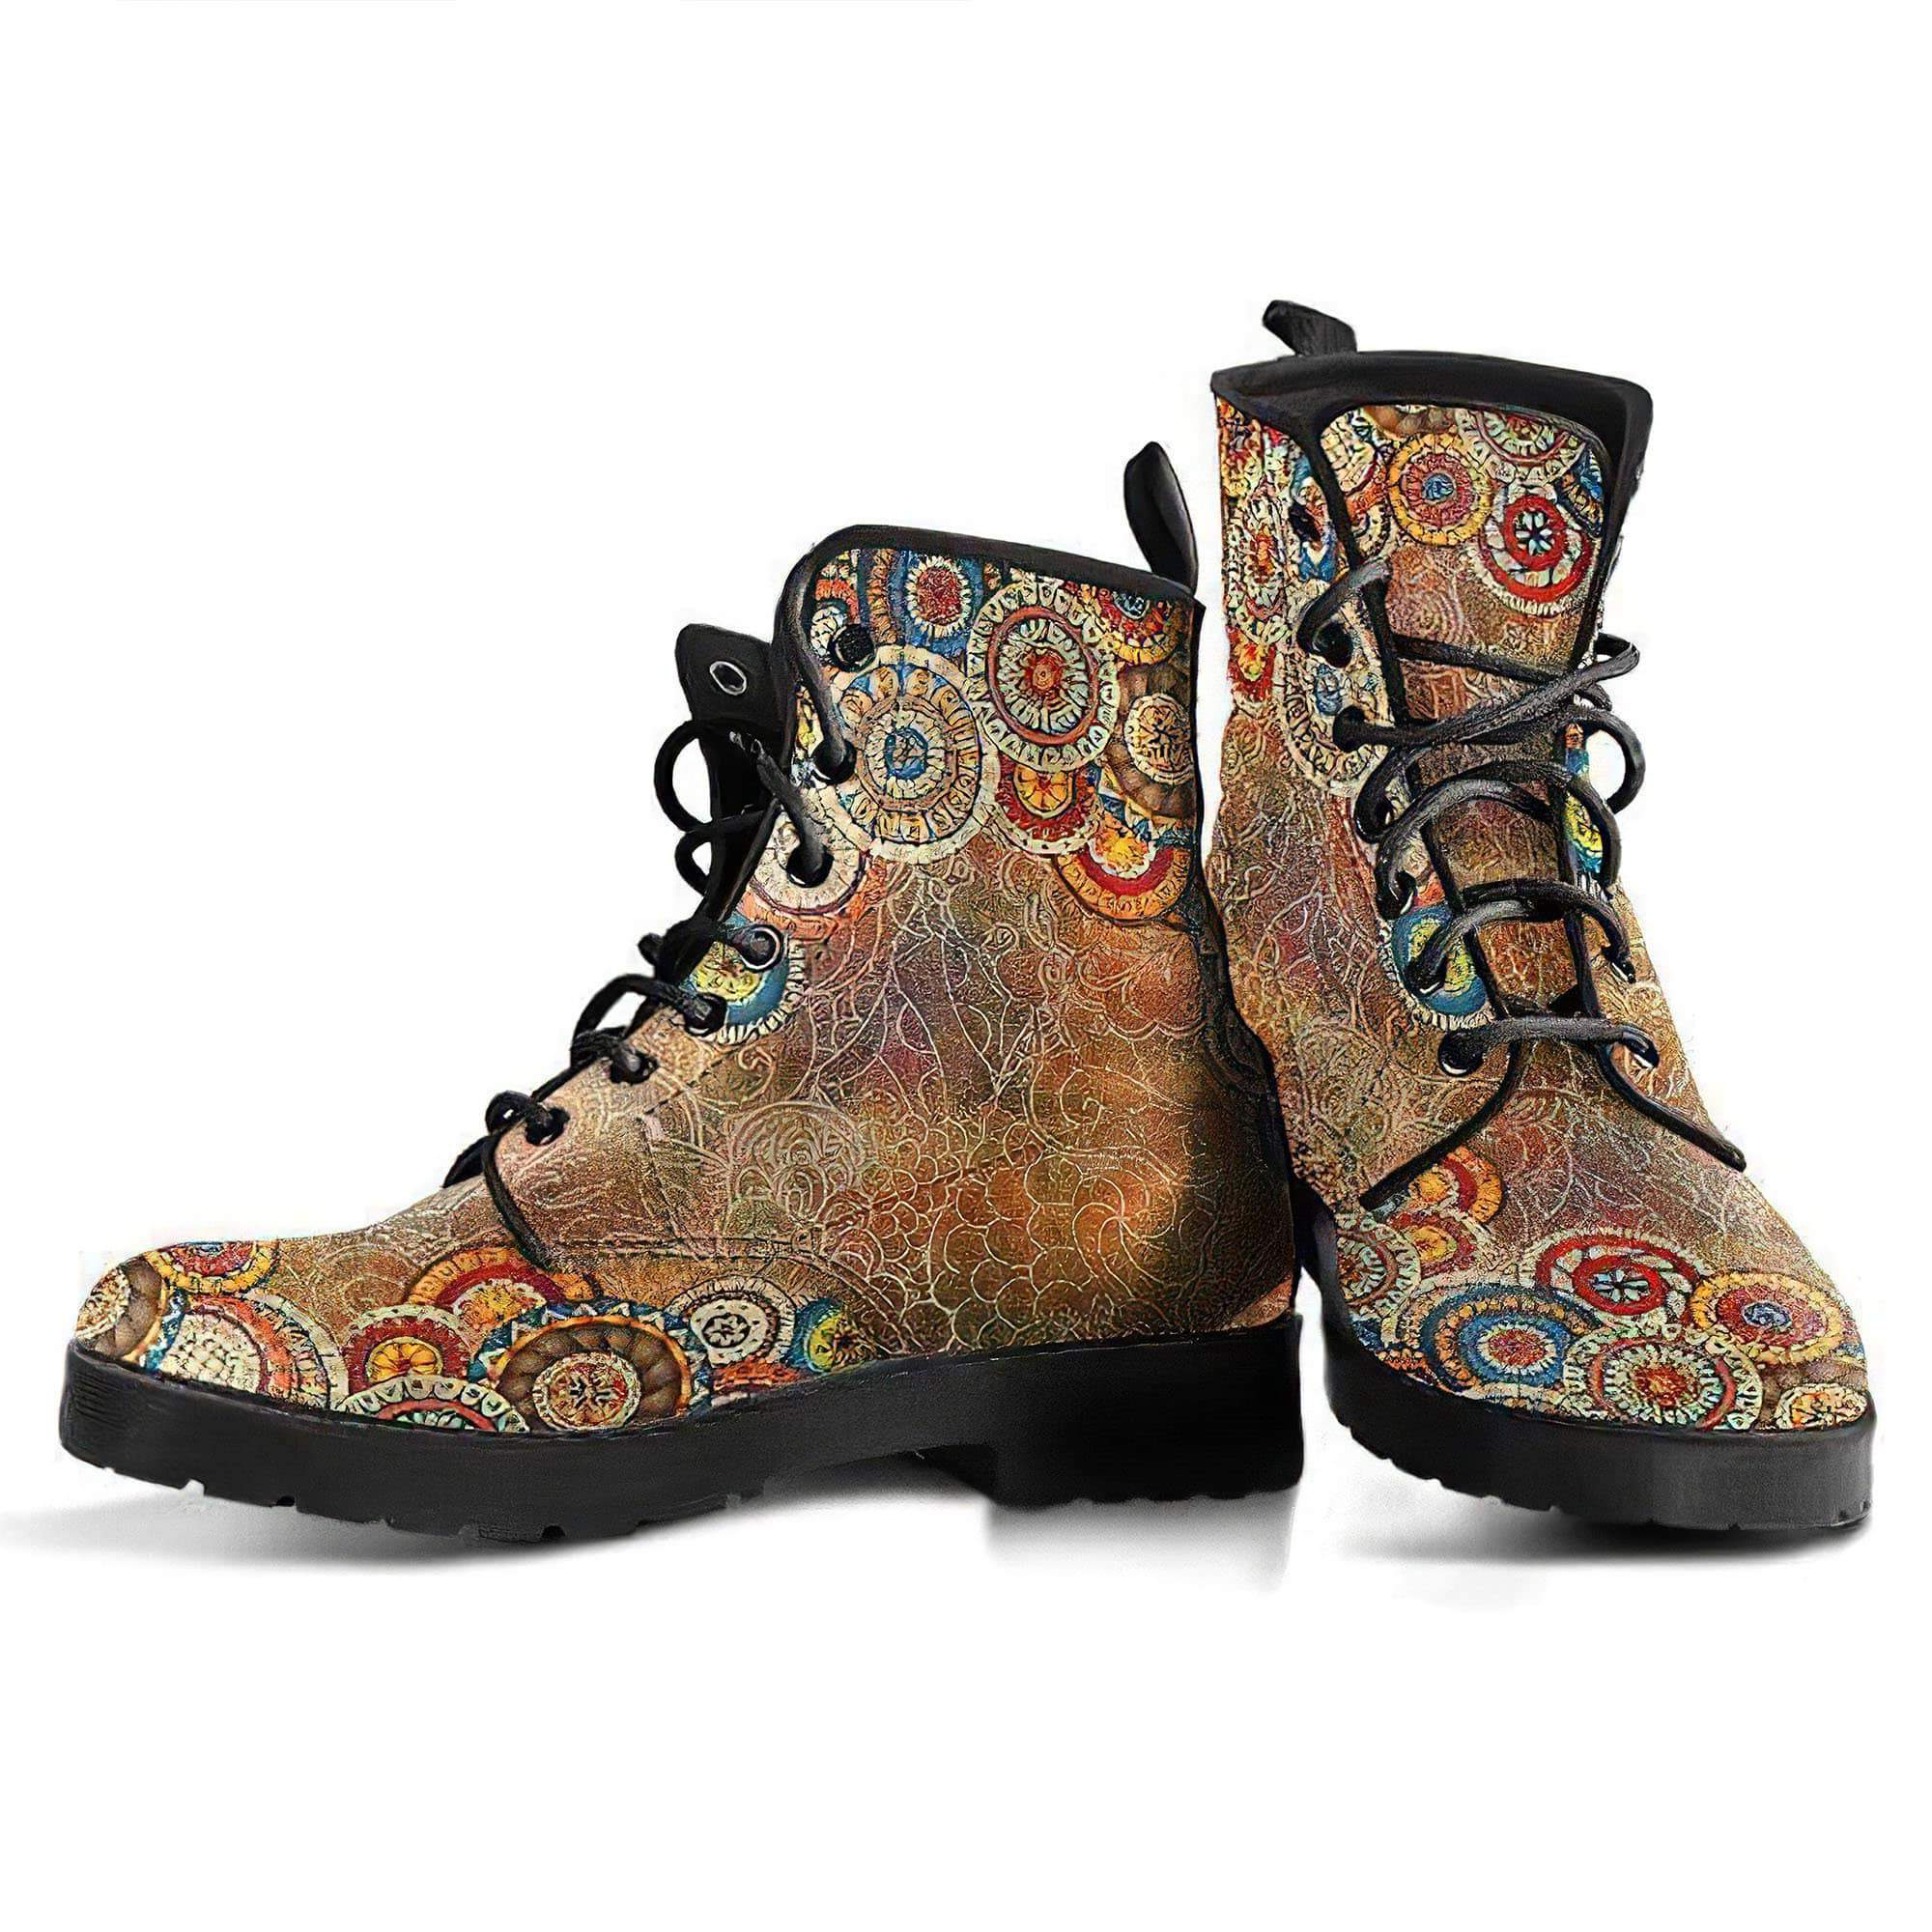 henna-women-s-leather-boots-women-s-leather-boots-12051877986365.jpg